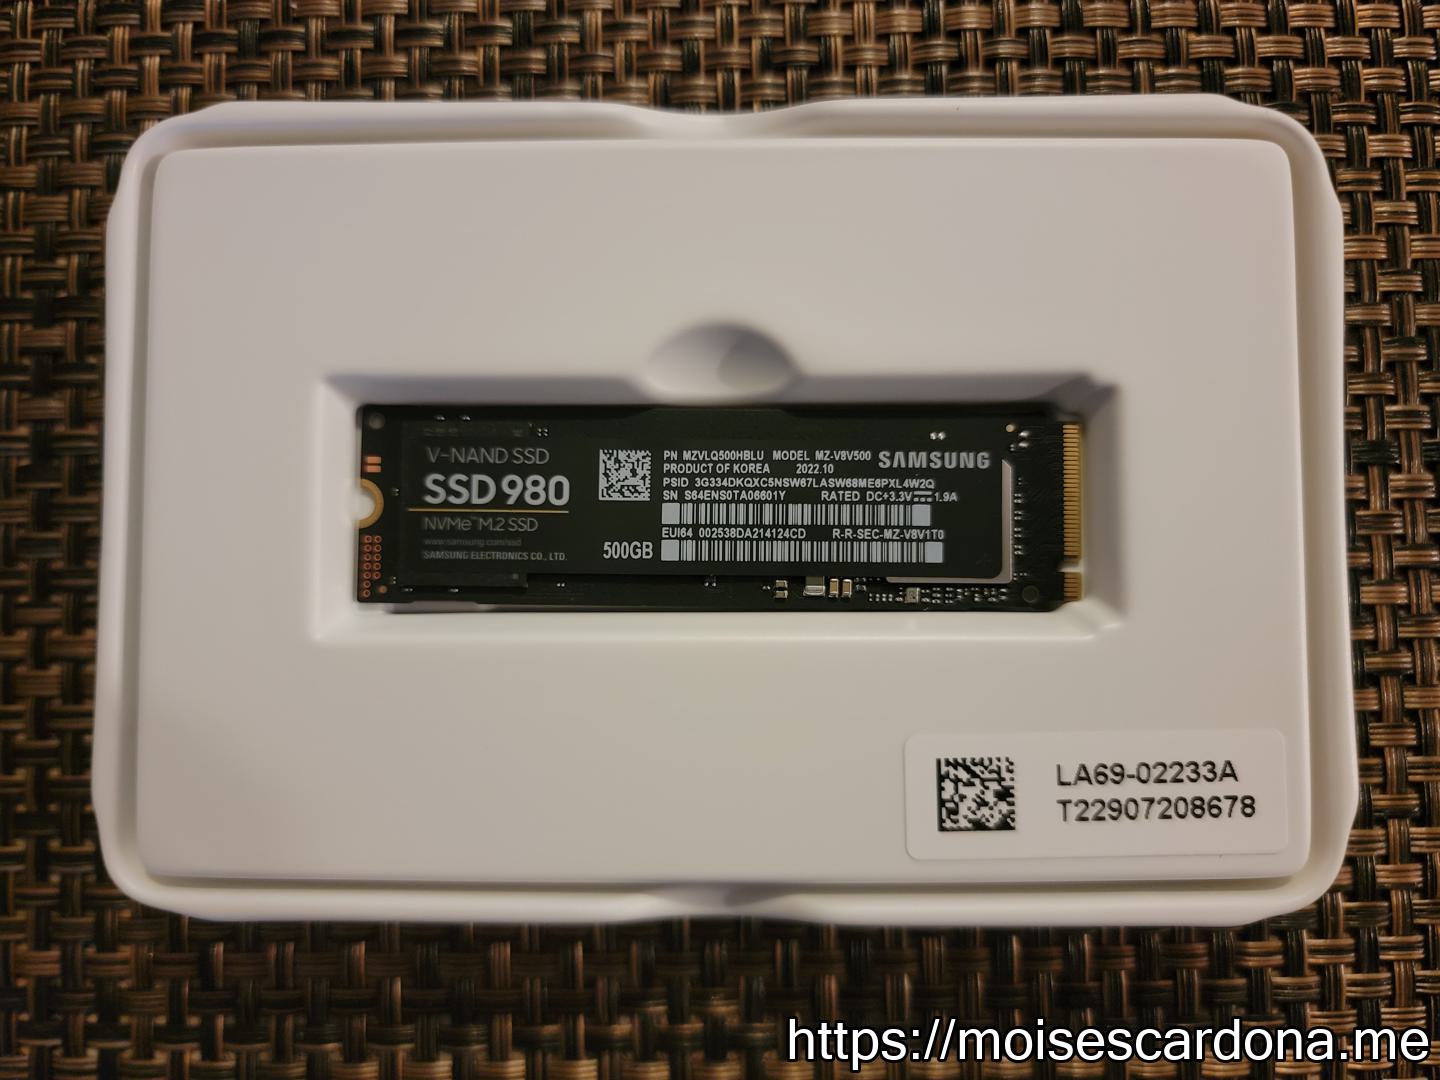 Samsung SSD 980 for ASUS E210MA laptop 04